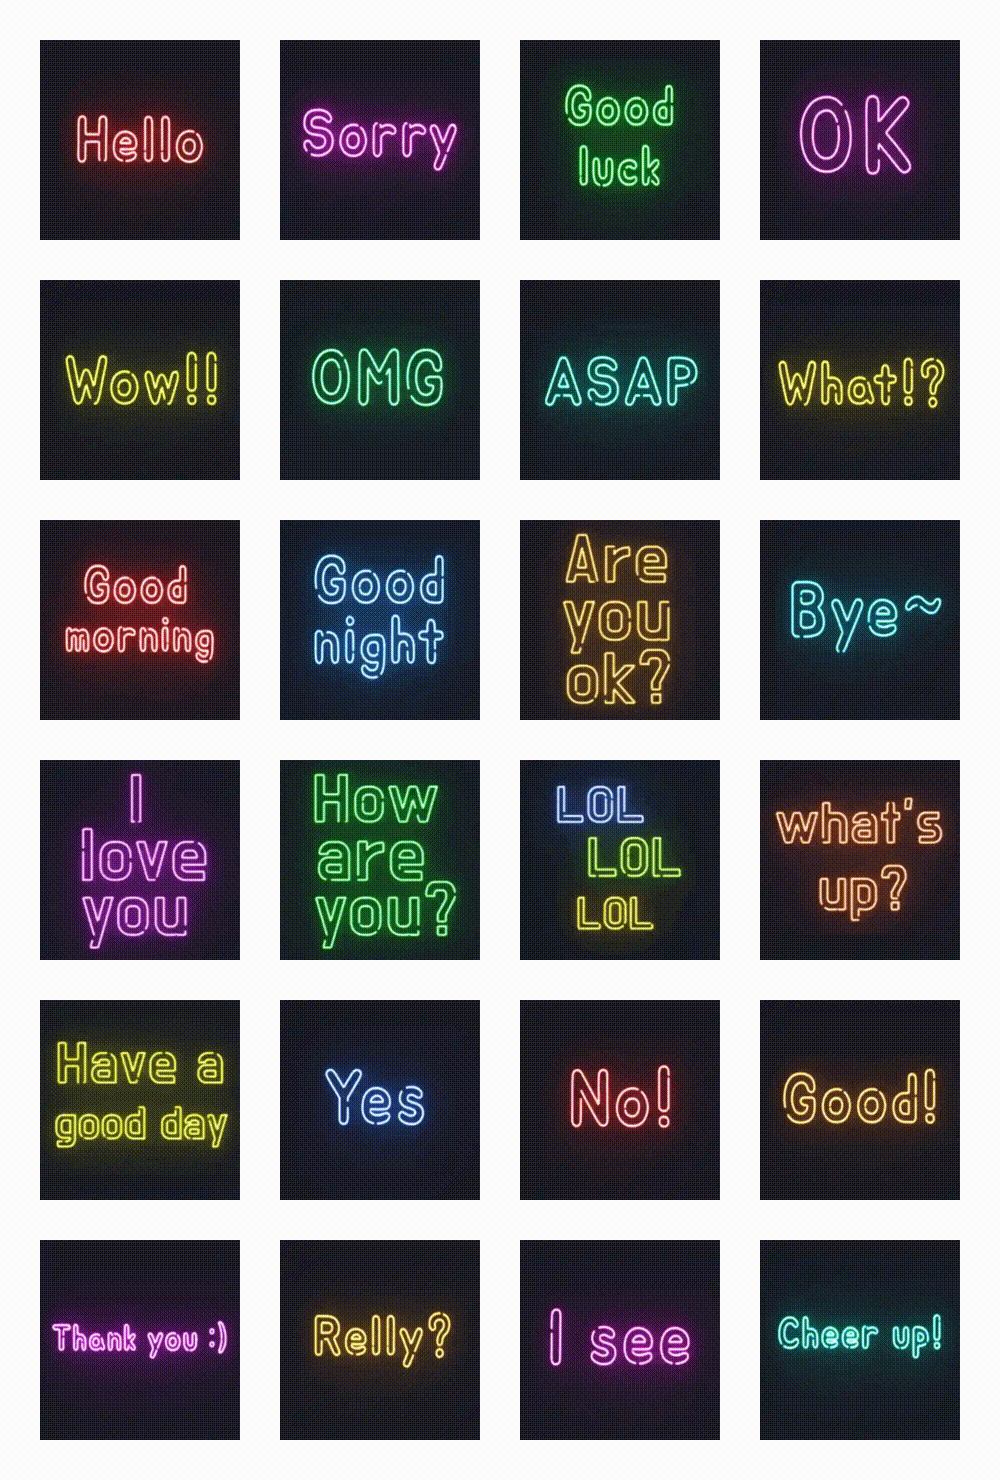 Neonsign Etc. sticker pack for Whatsapp, Telegram, Signal, and others chatting and message apps